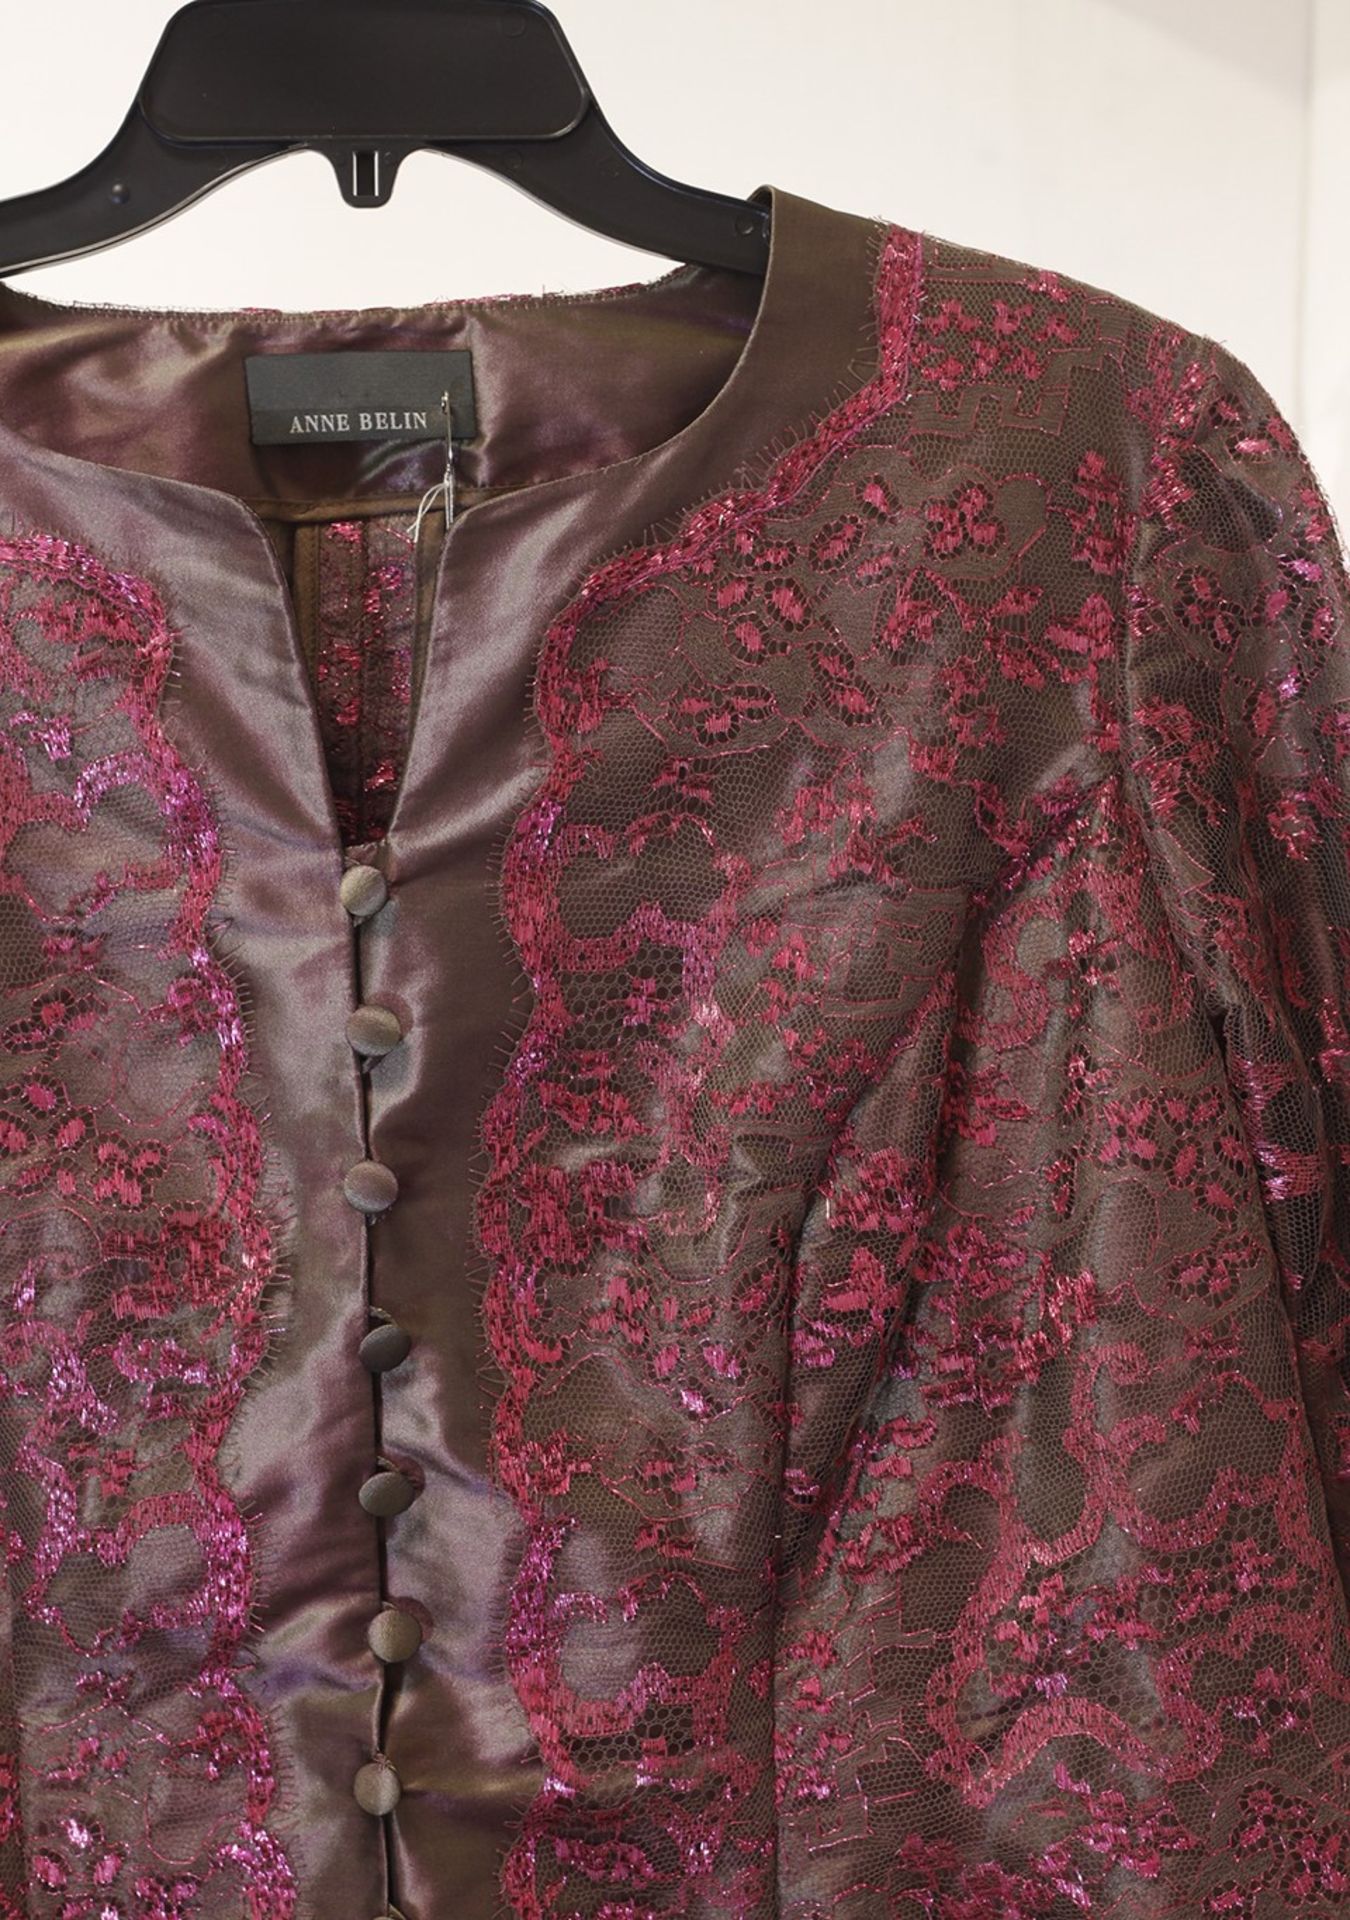 1 x Anne Belin Purple Pink Jacket - From a High End Clothing Boutique In The Netherlands - Image 3 of 11